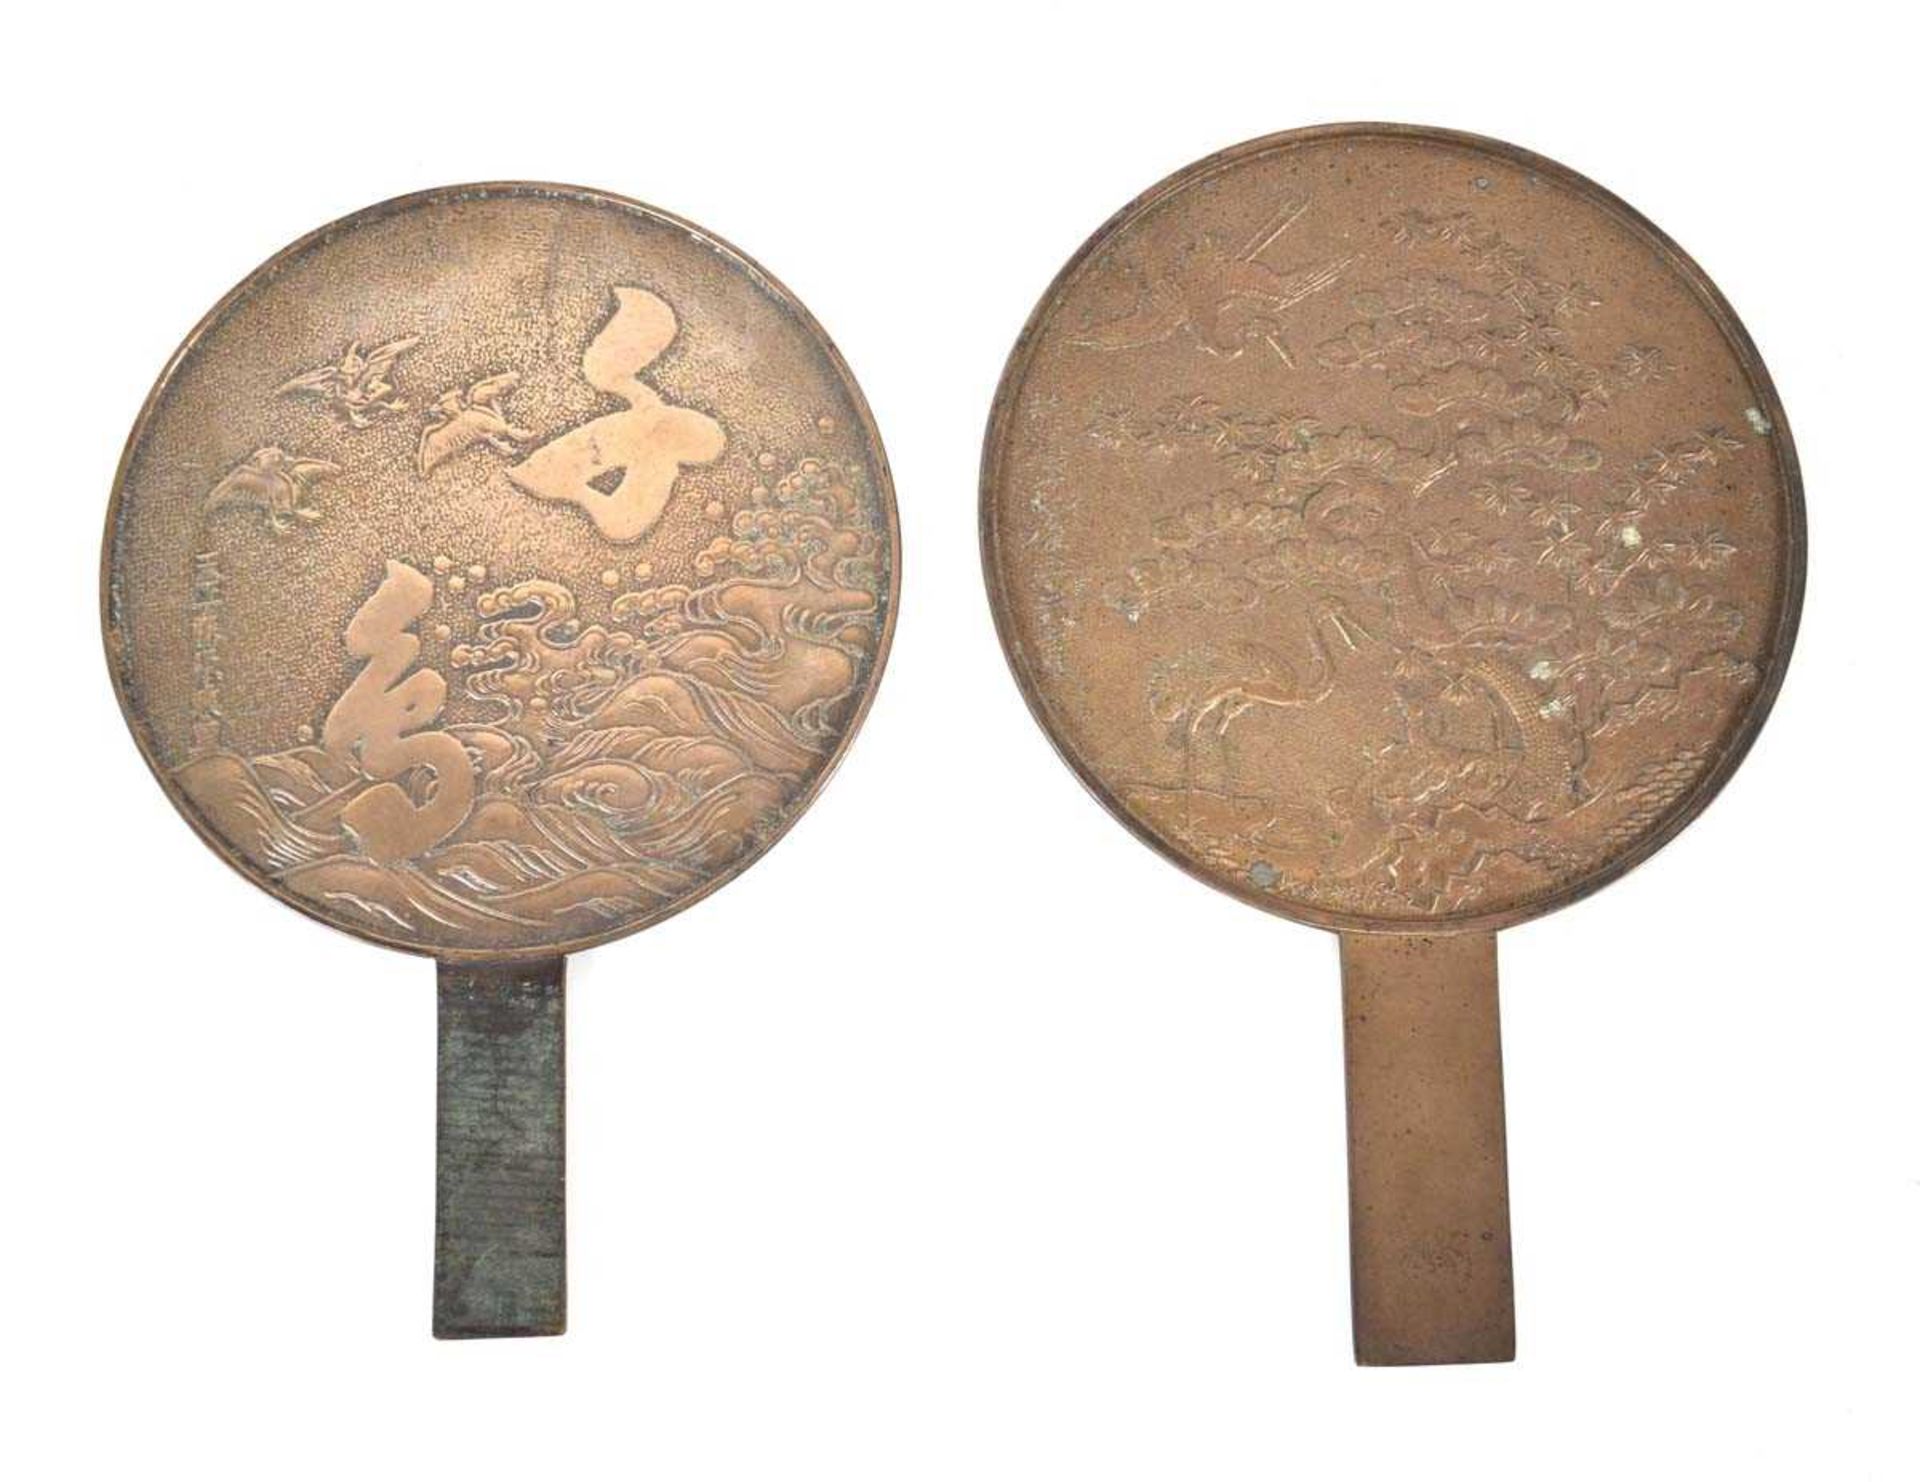 Two Chinese cast metal mirrors, one depicting cranes by a pine tree, l. 31.5 cm (2) *from the